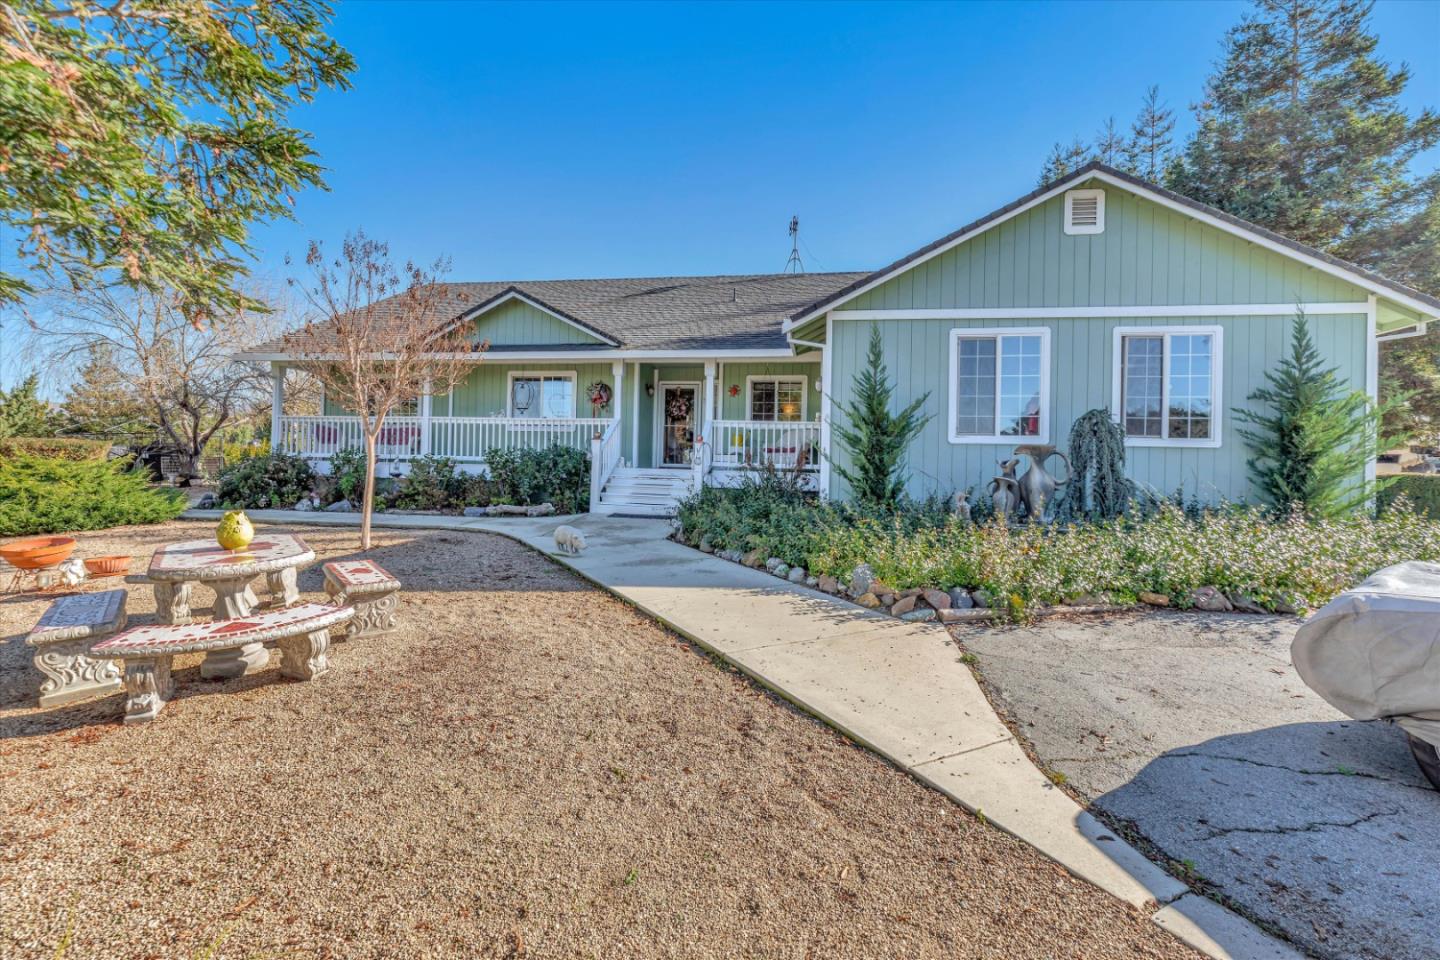 Photo of 233 Menzel Rd in Hollister, CA